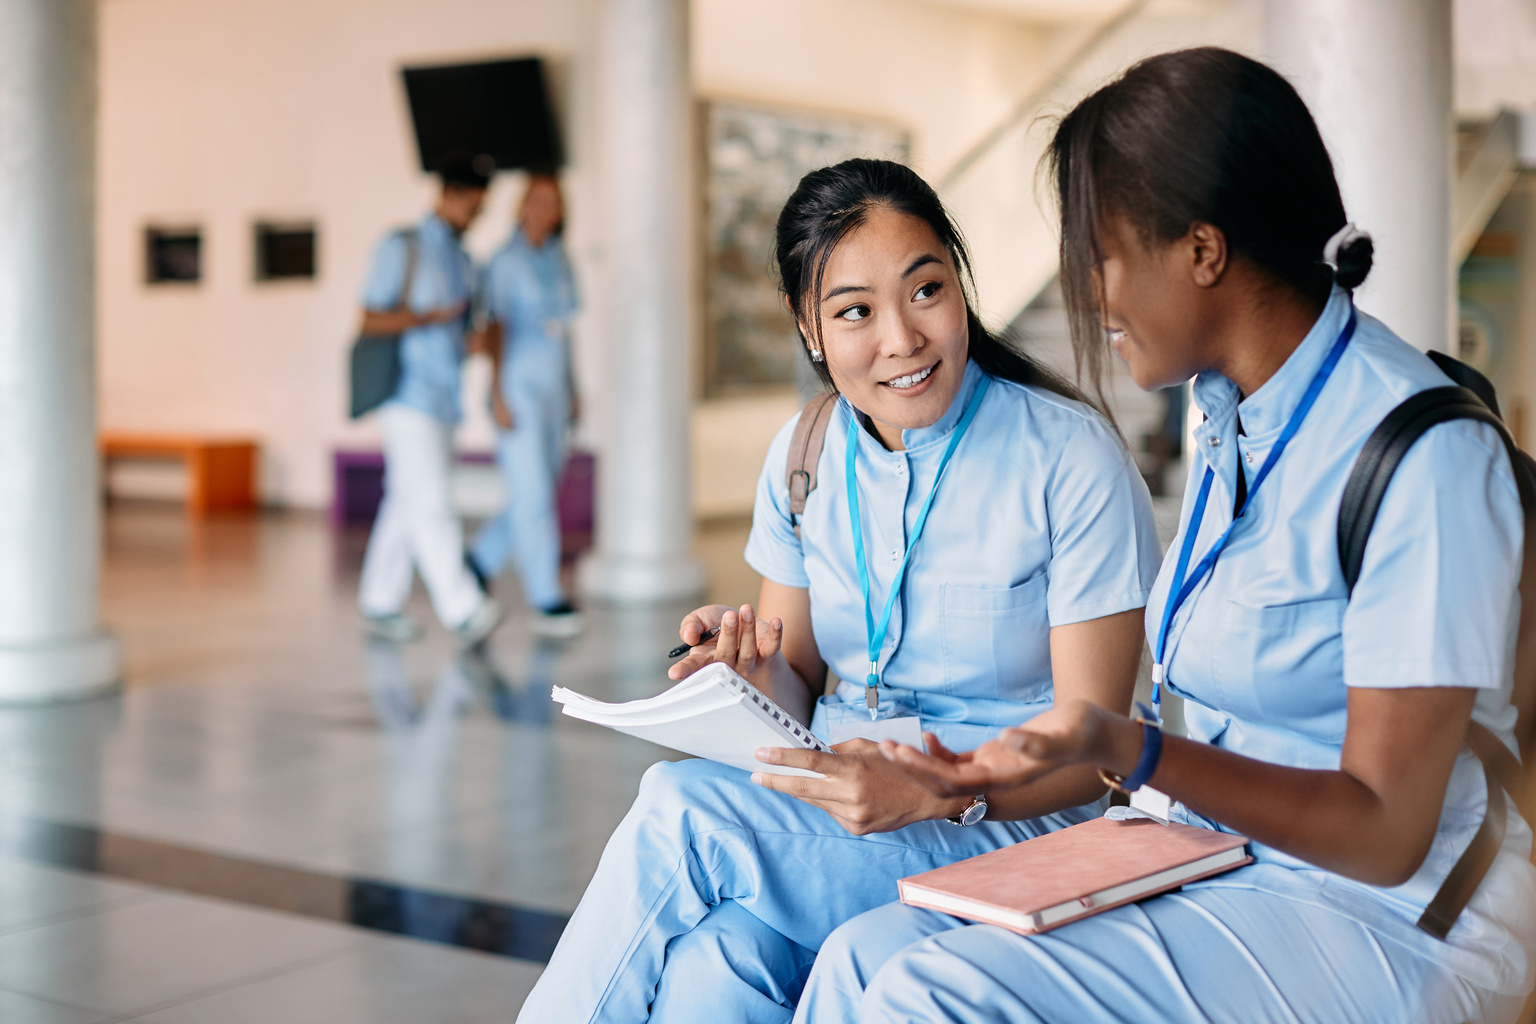 AACN Essentials recognizes communication as a teachable concept in nursing education